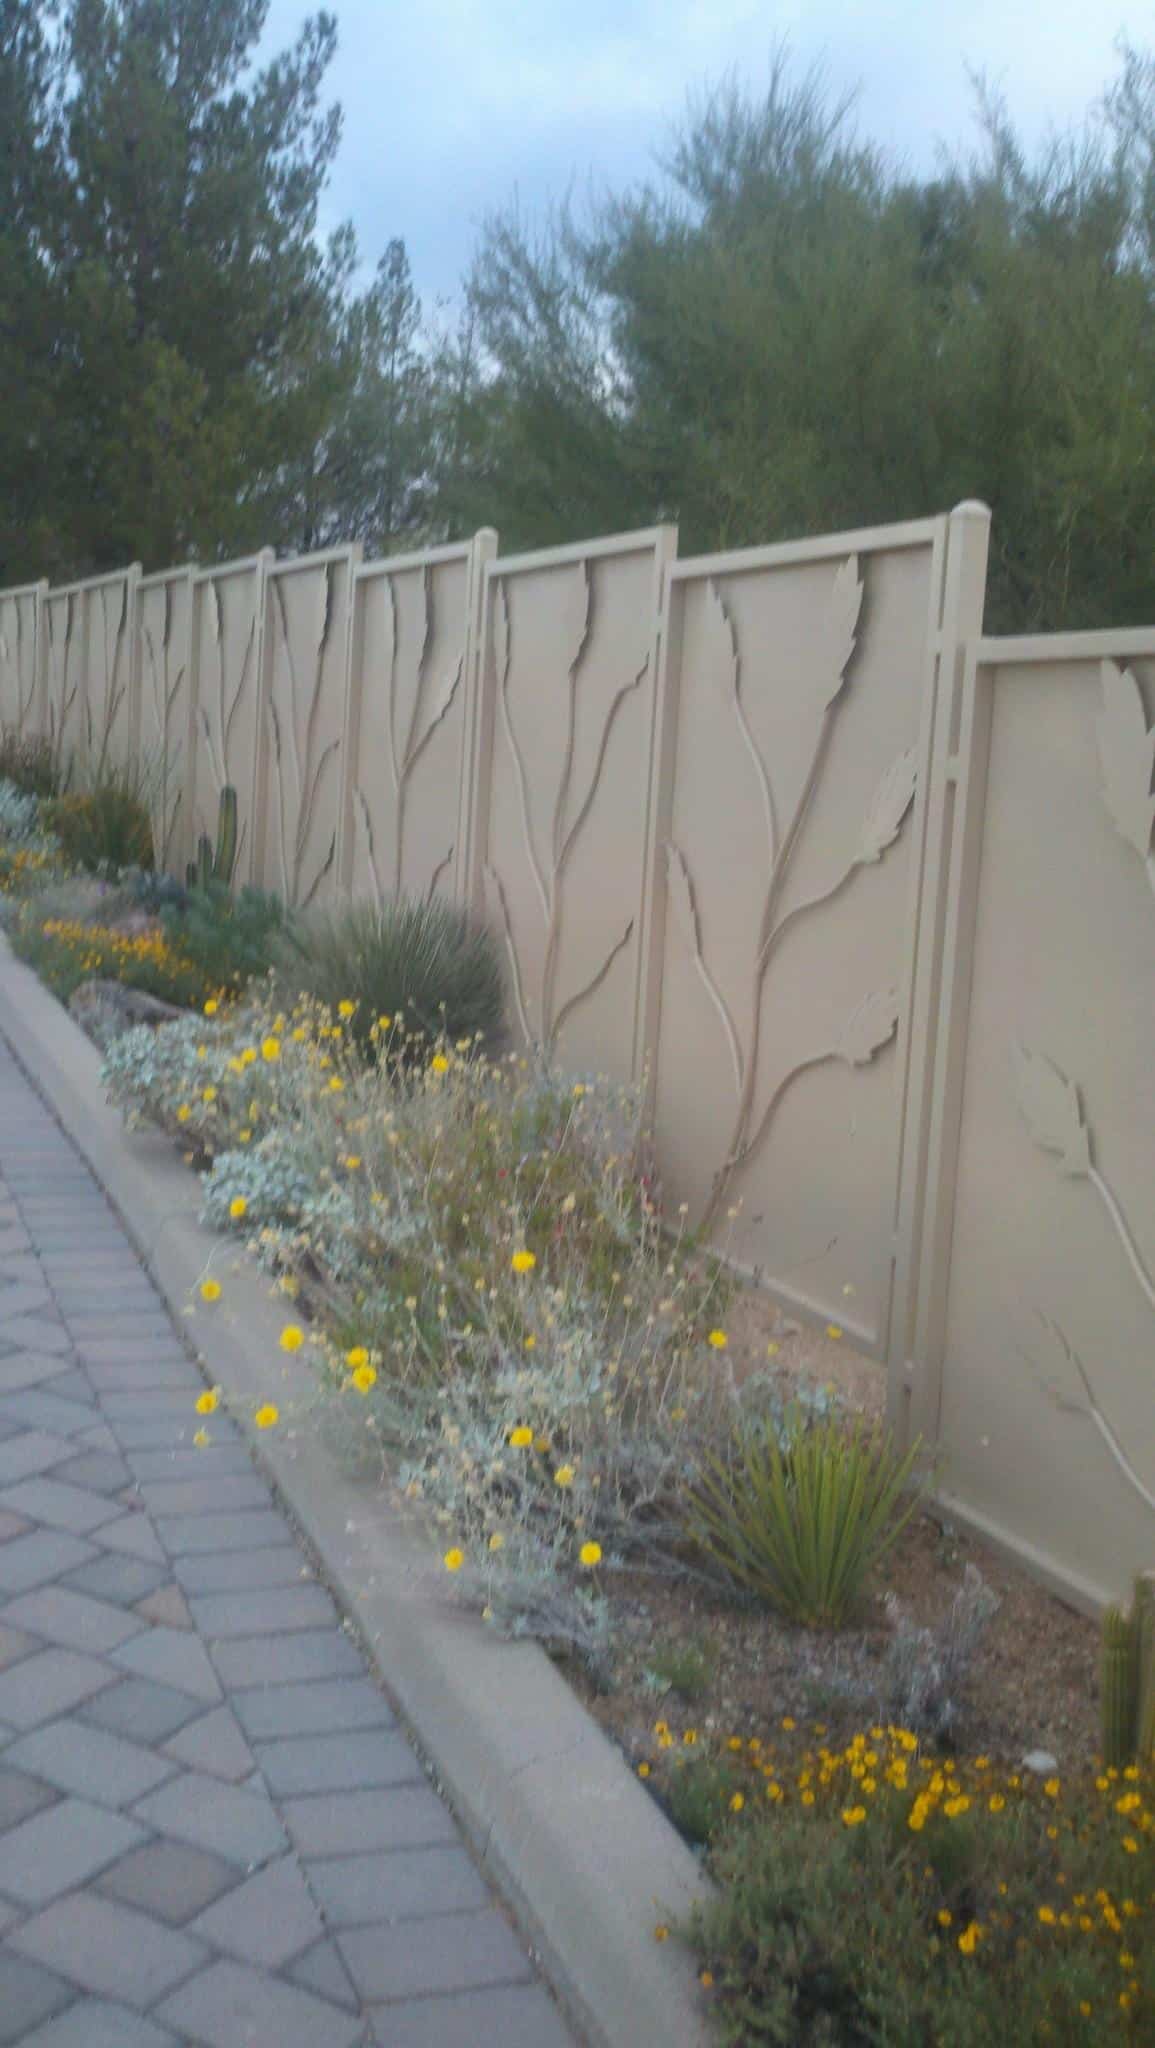 Iron fence with painted metal plates with ocotillo motif IF225-2